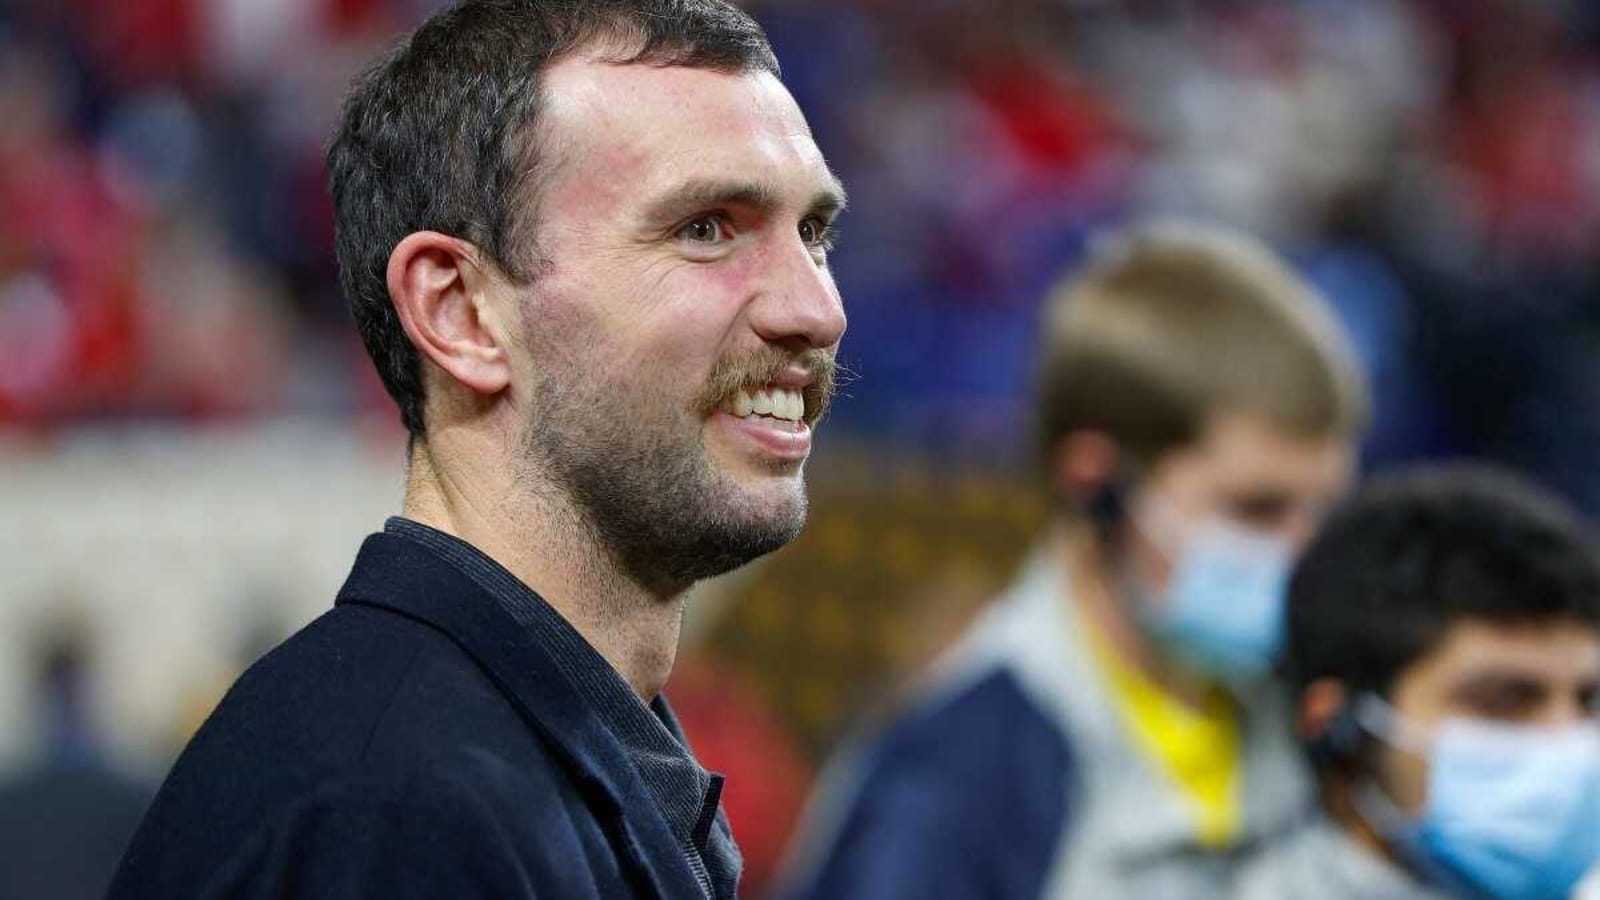 Andrew Luck Raves About Stanford Coach Tara VanDerveer, Who Is One Away From All-Time Record